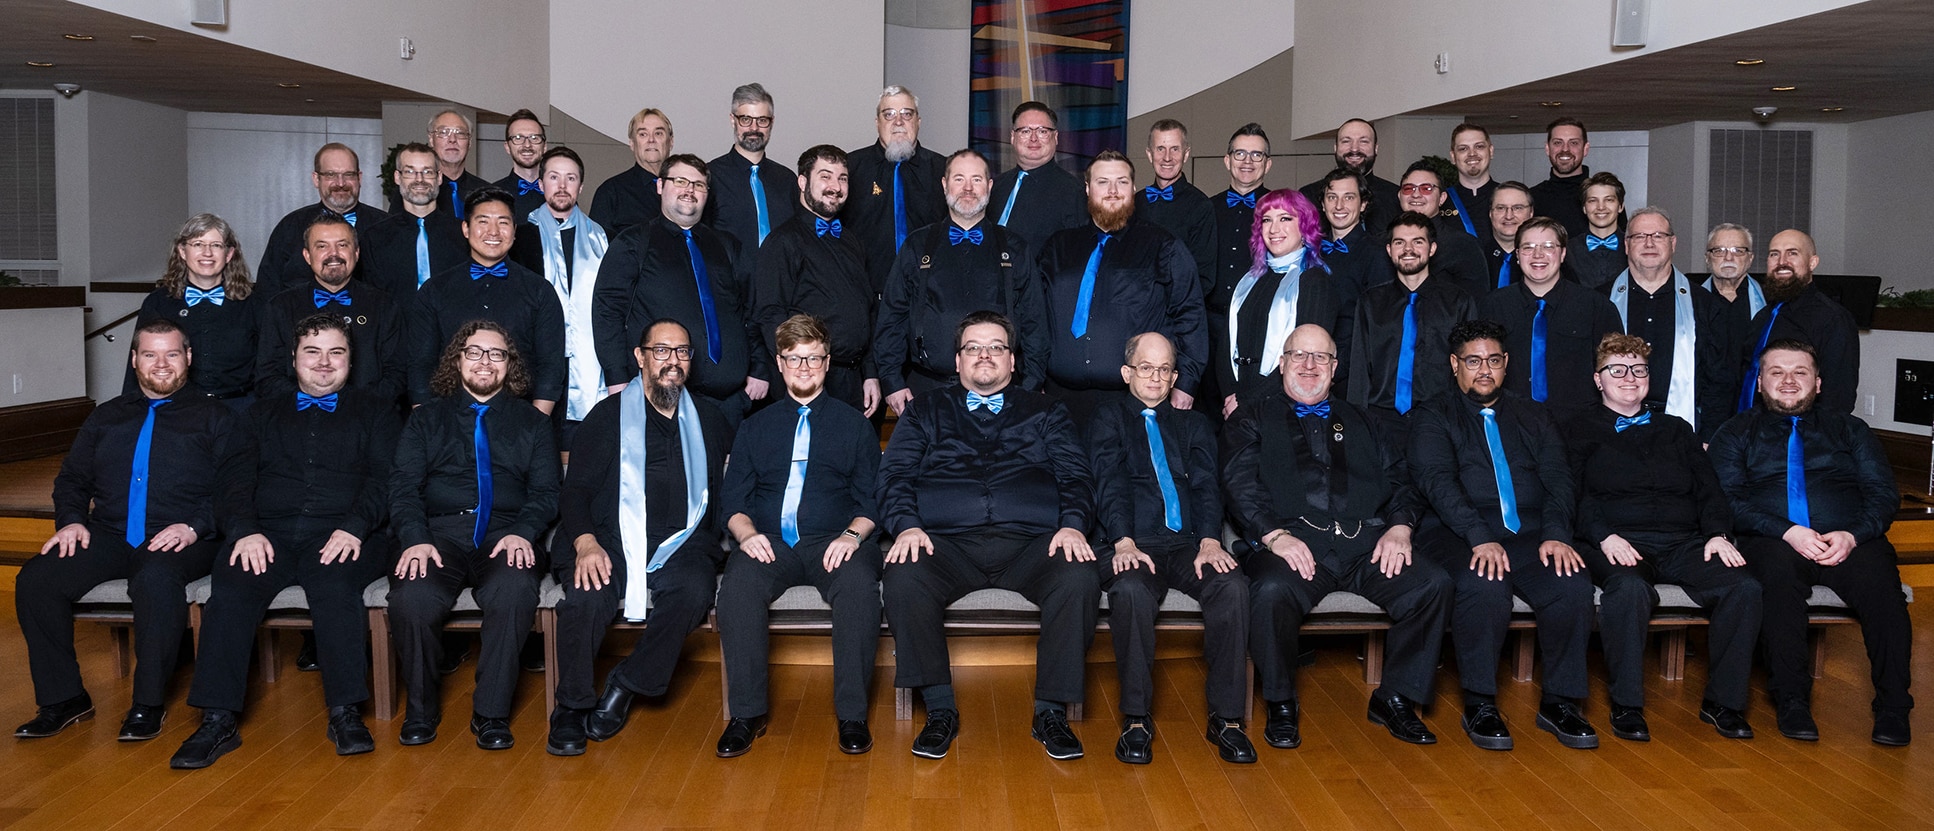 Formal group photo of Perfect Harmony Chorus taken at the December 2023 concert. Approximately 40 singers are pictured wearing formal black attire with blue ties.